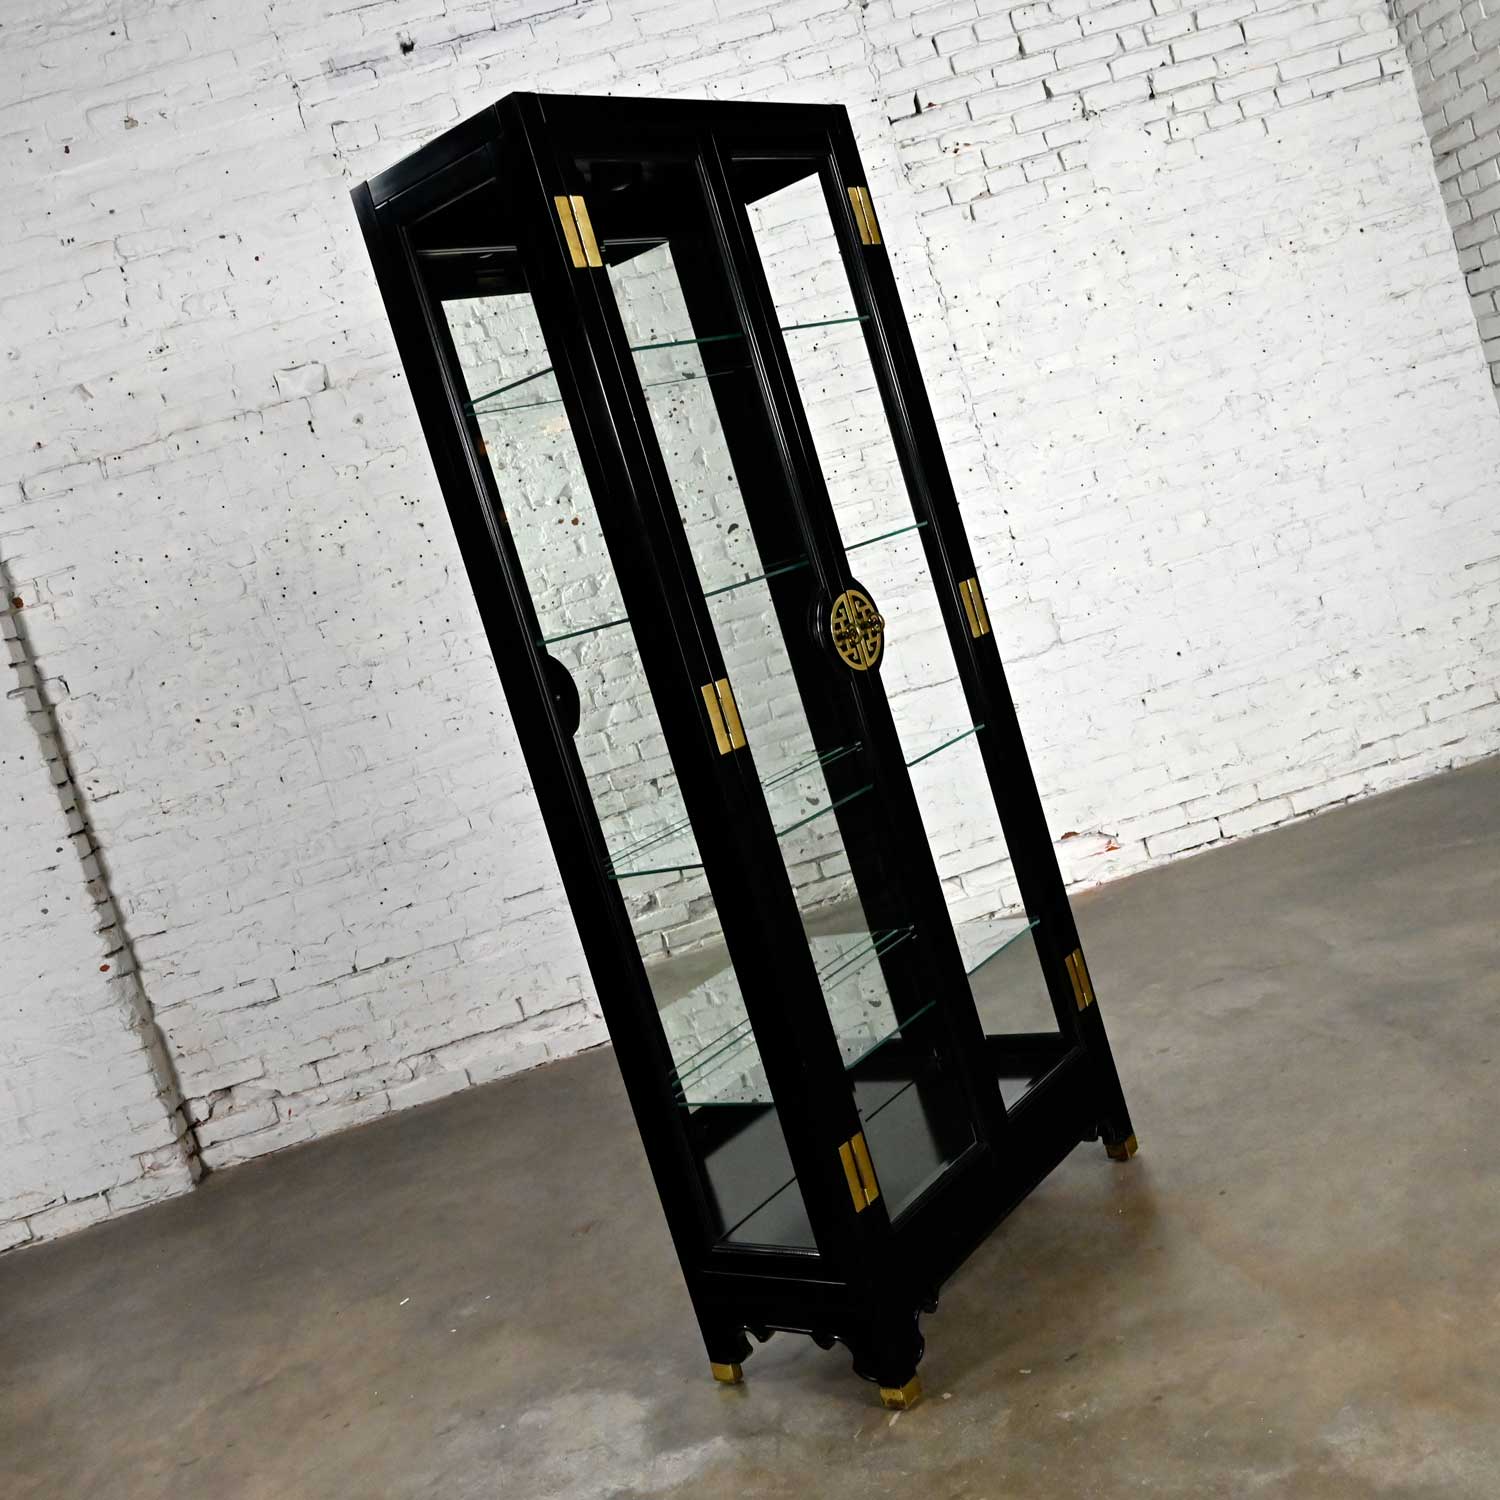 Vintage Chinoiserie Black Display Cabinet Vitrine with Mirrored Back & Brass Plated Details by American of Martinsville